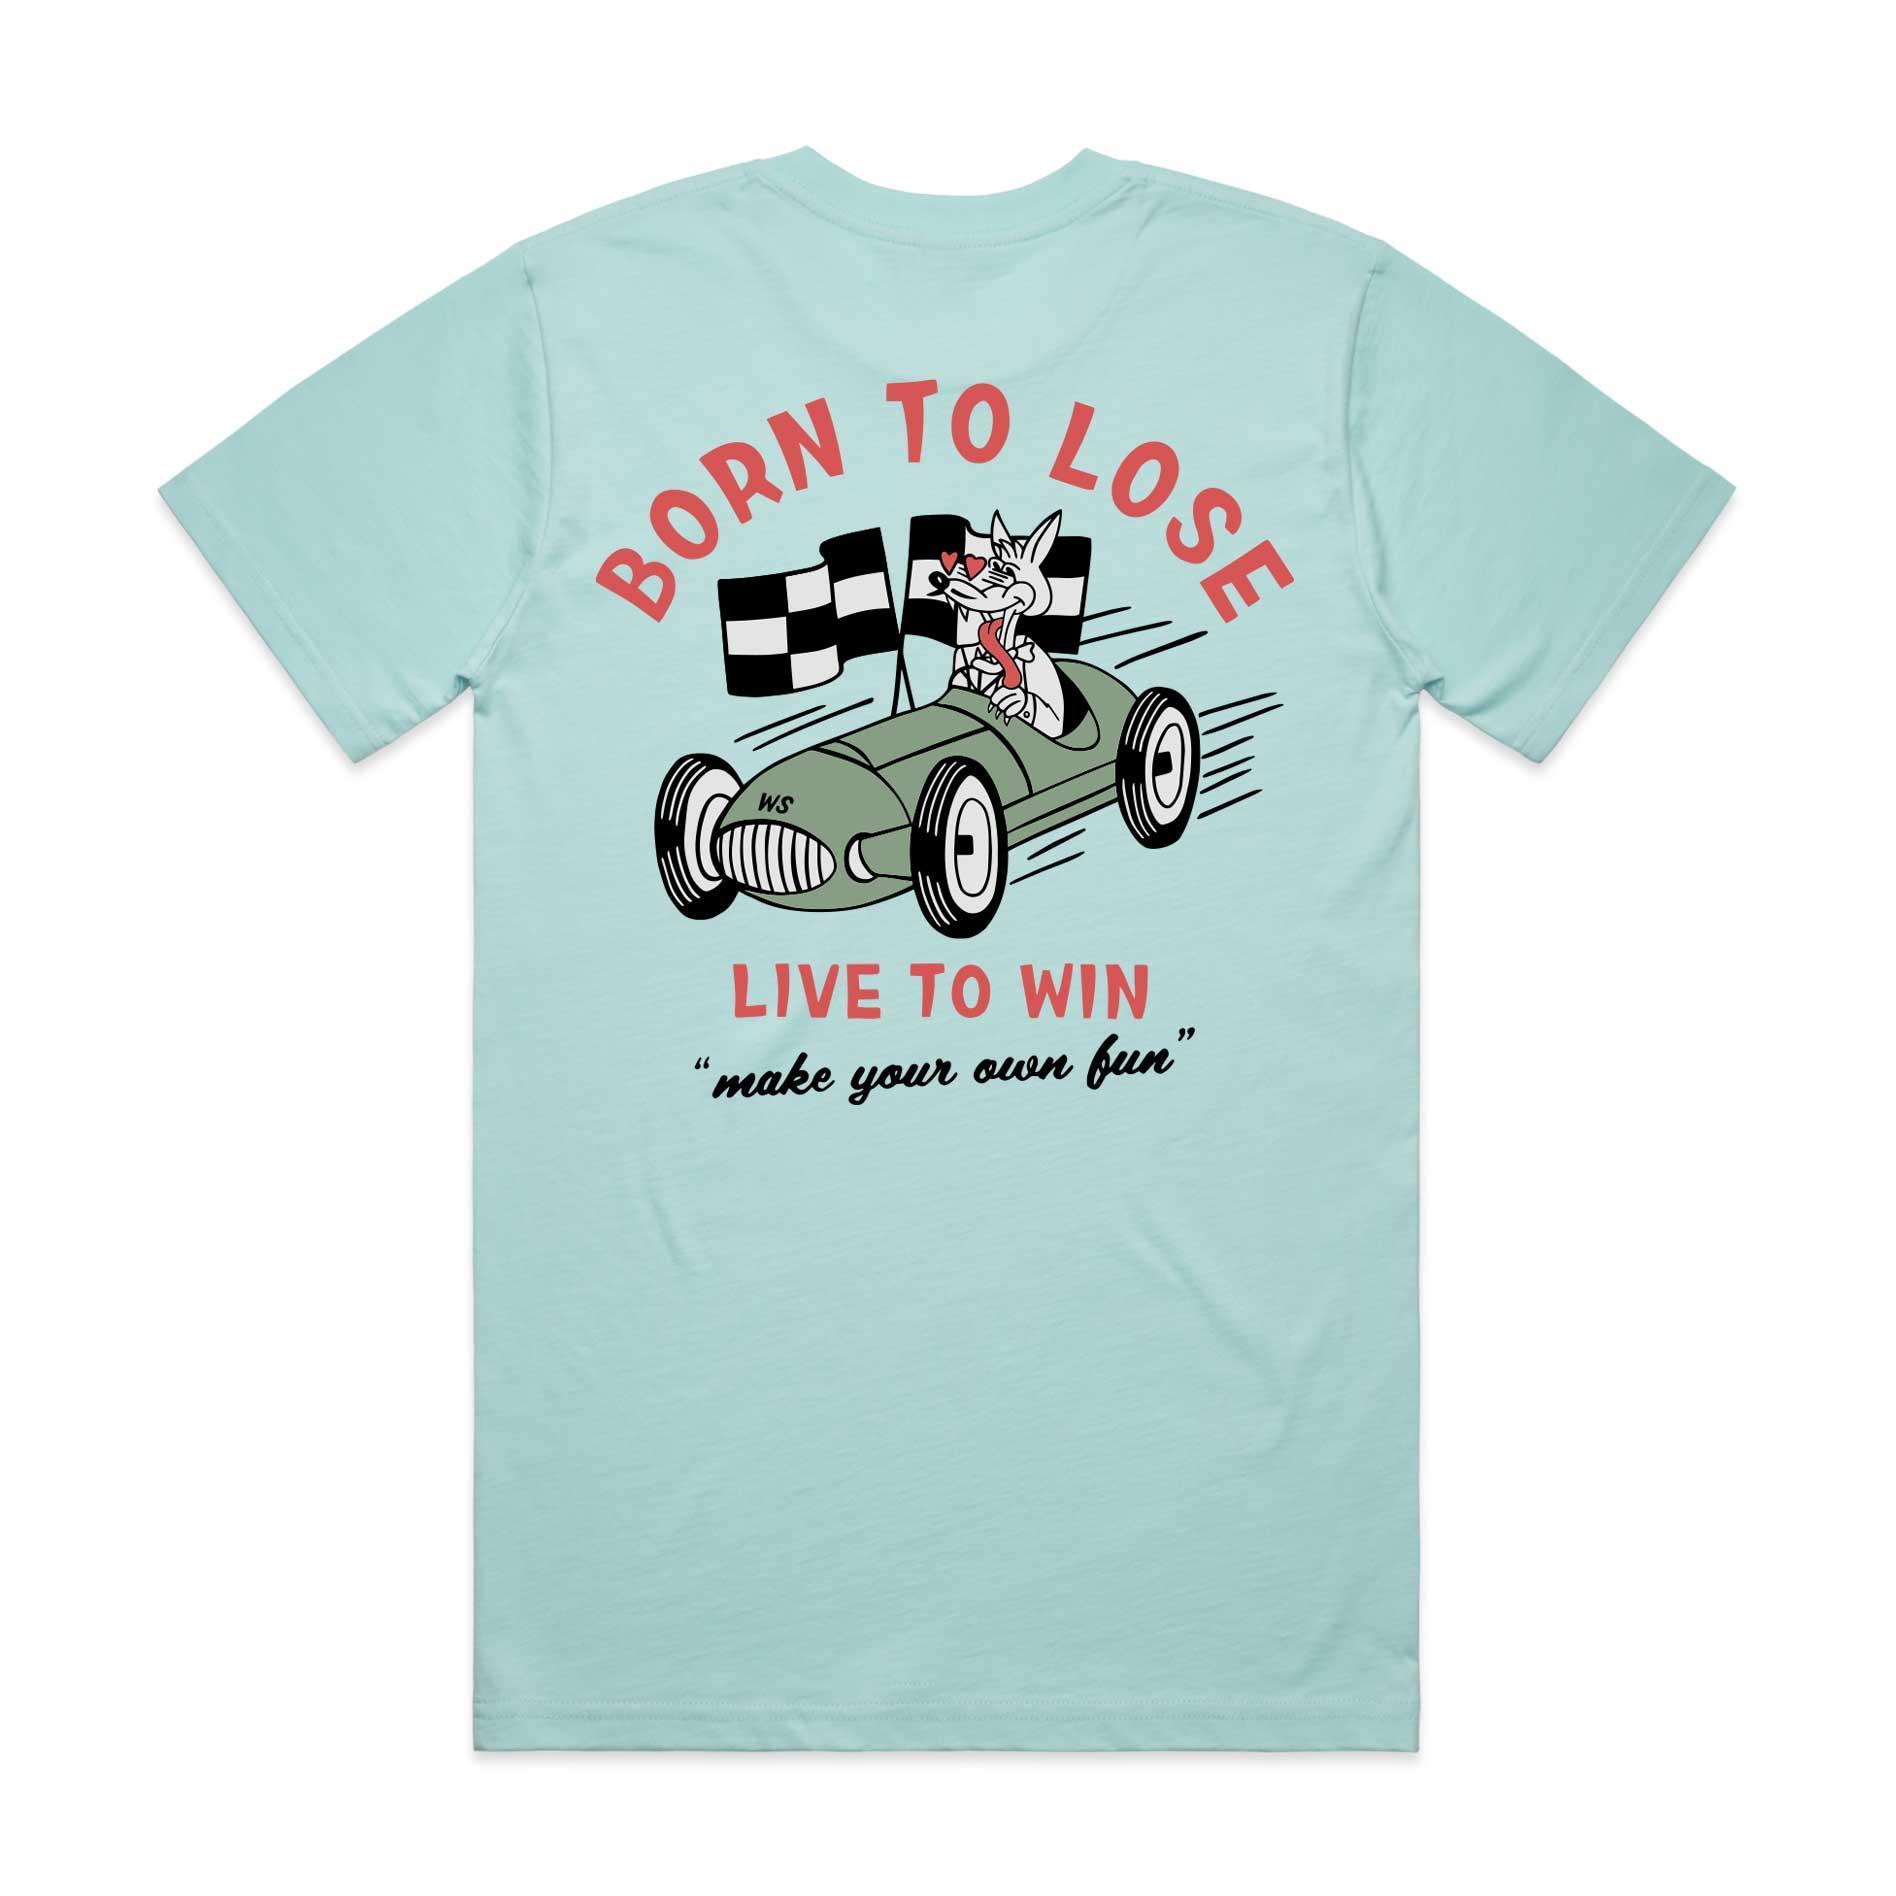 Born to Lose T-Shirt - Watershed Brand